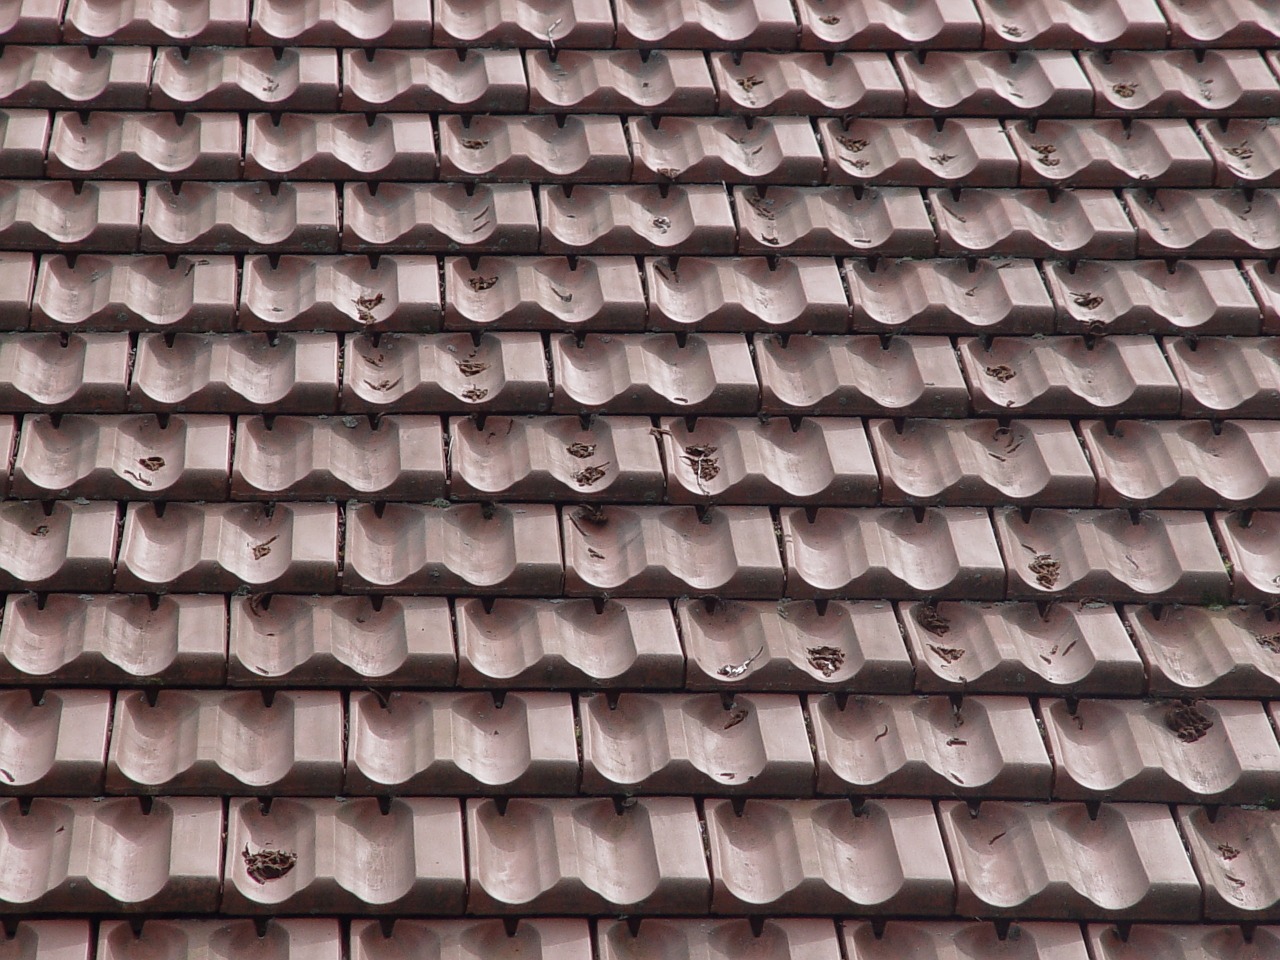 Tiled Roof Tile Wallpaper Roofing Cladding Photo